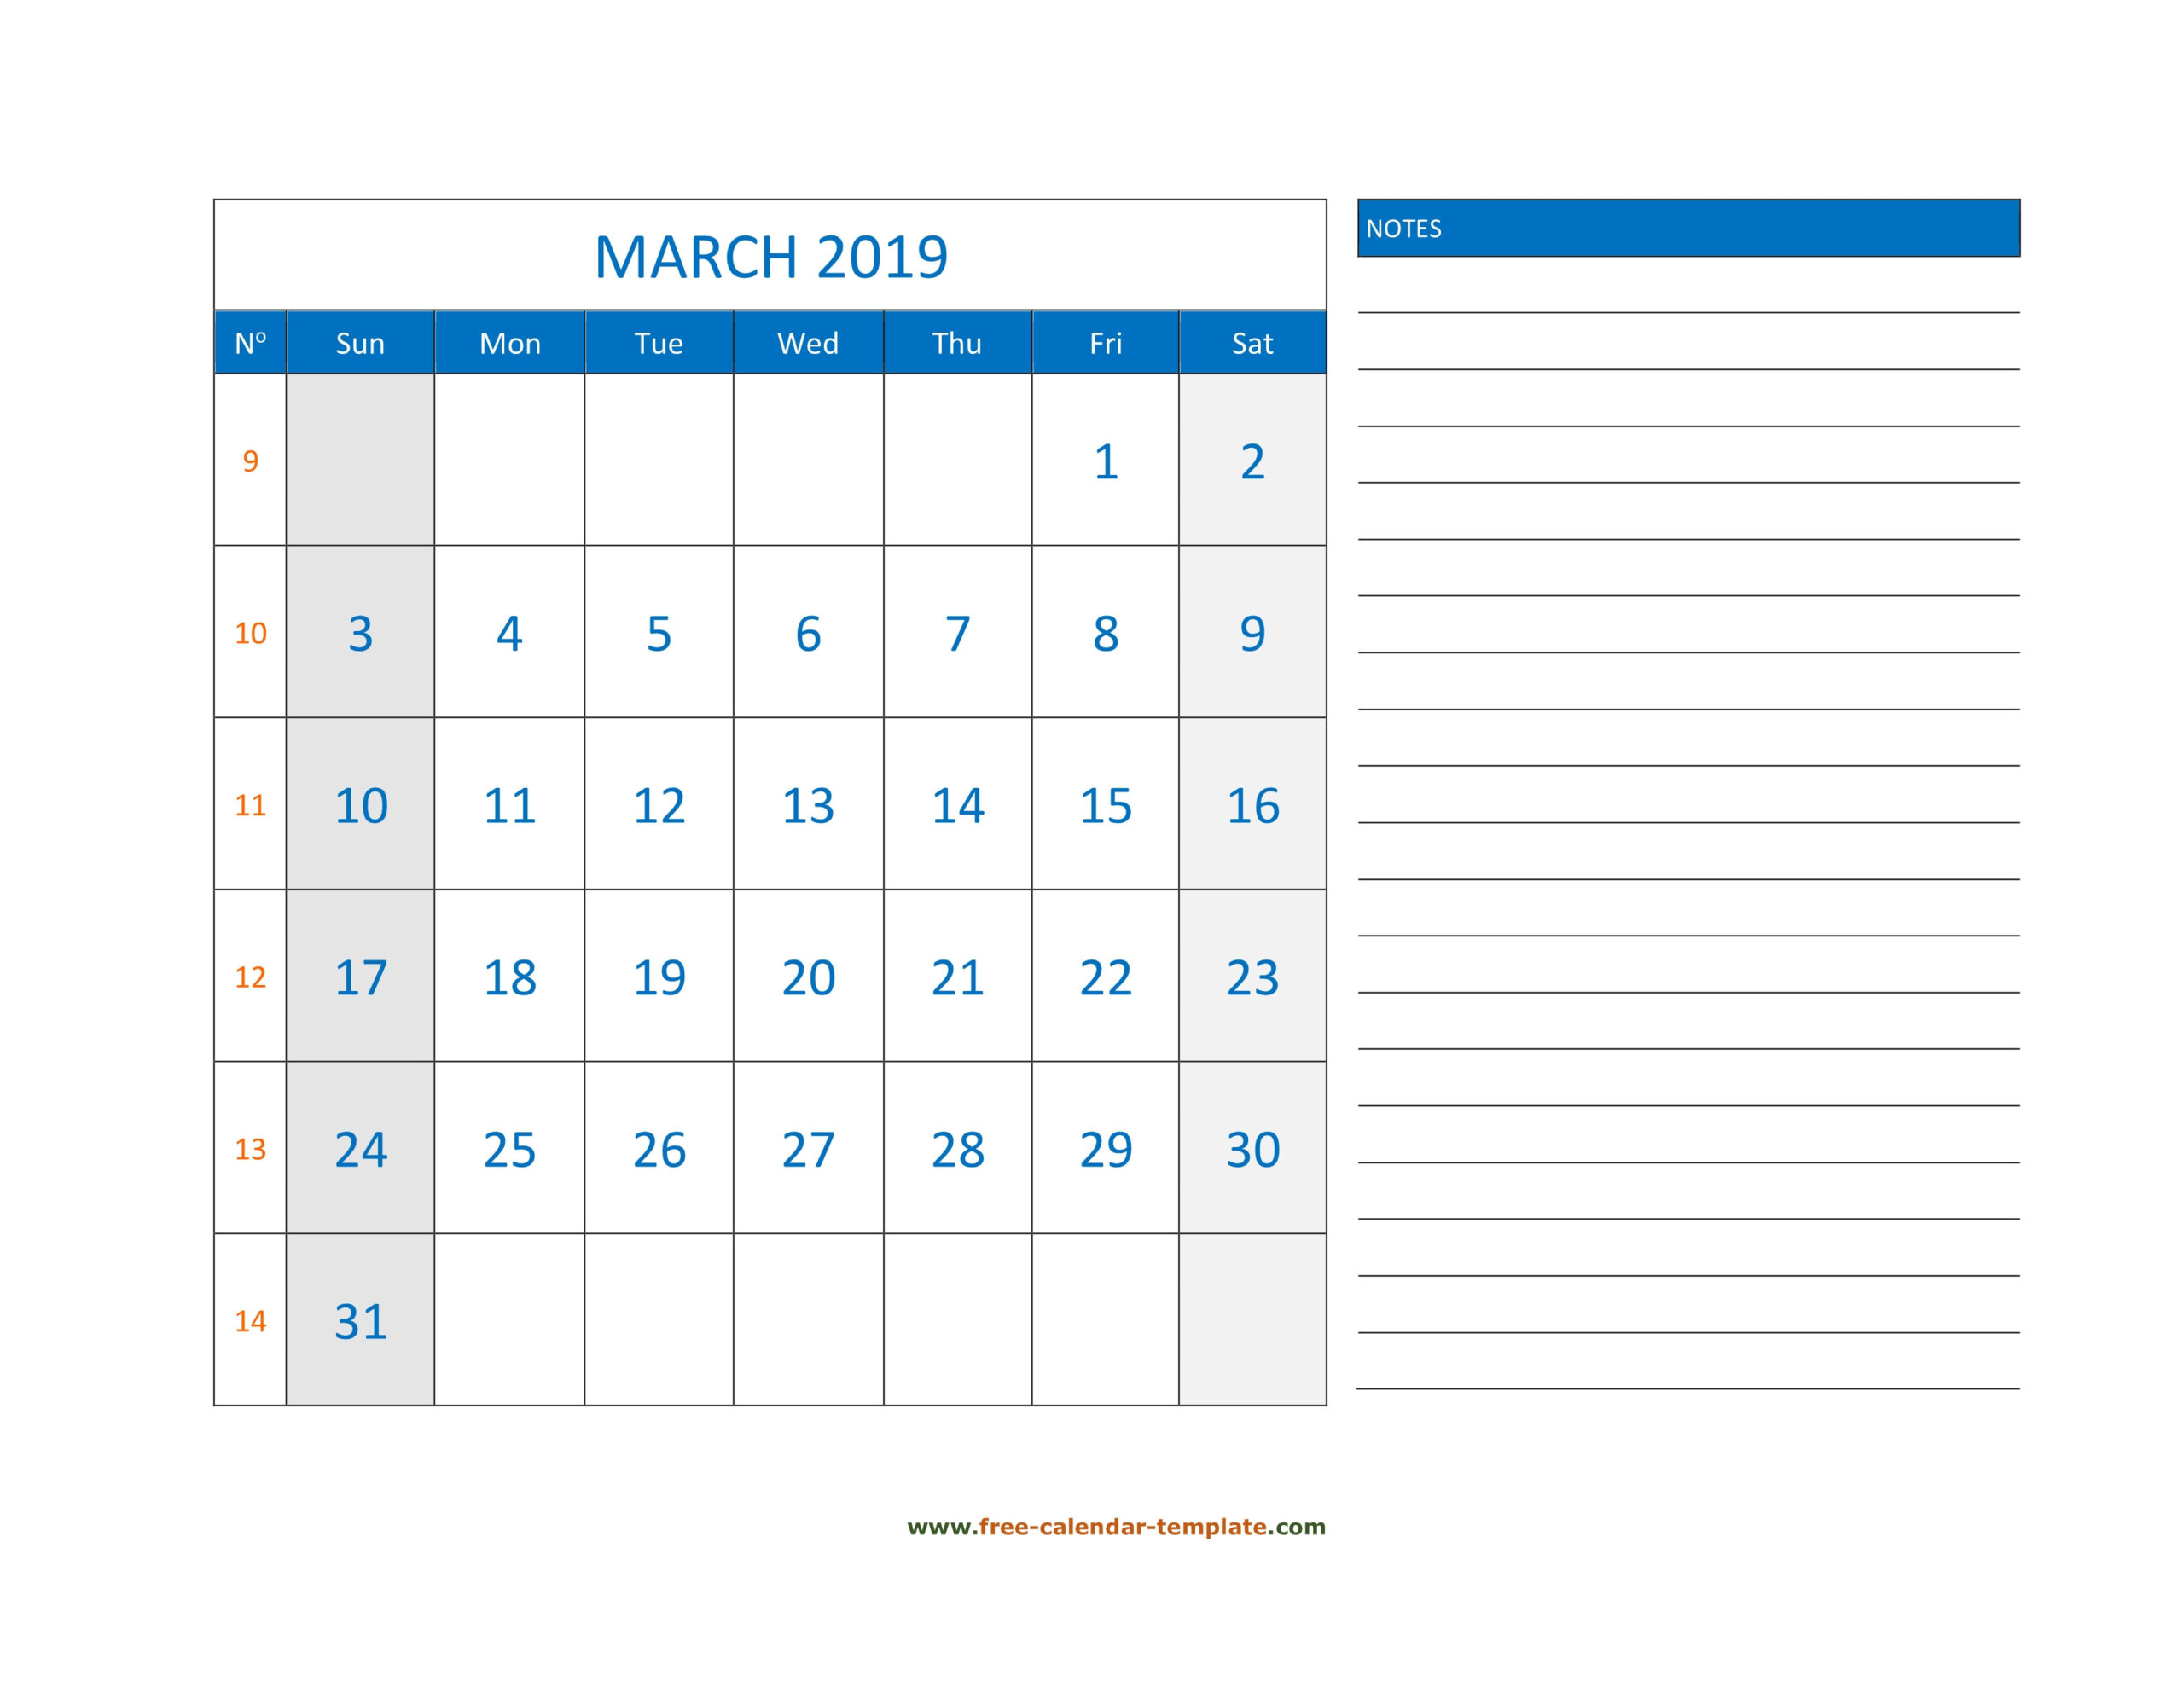 March Calendar 2019 Grid Lines For Holidays And Notes  Printable Word Calendar With Lines